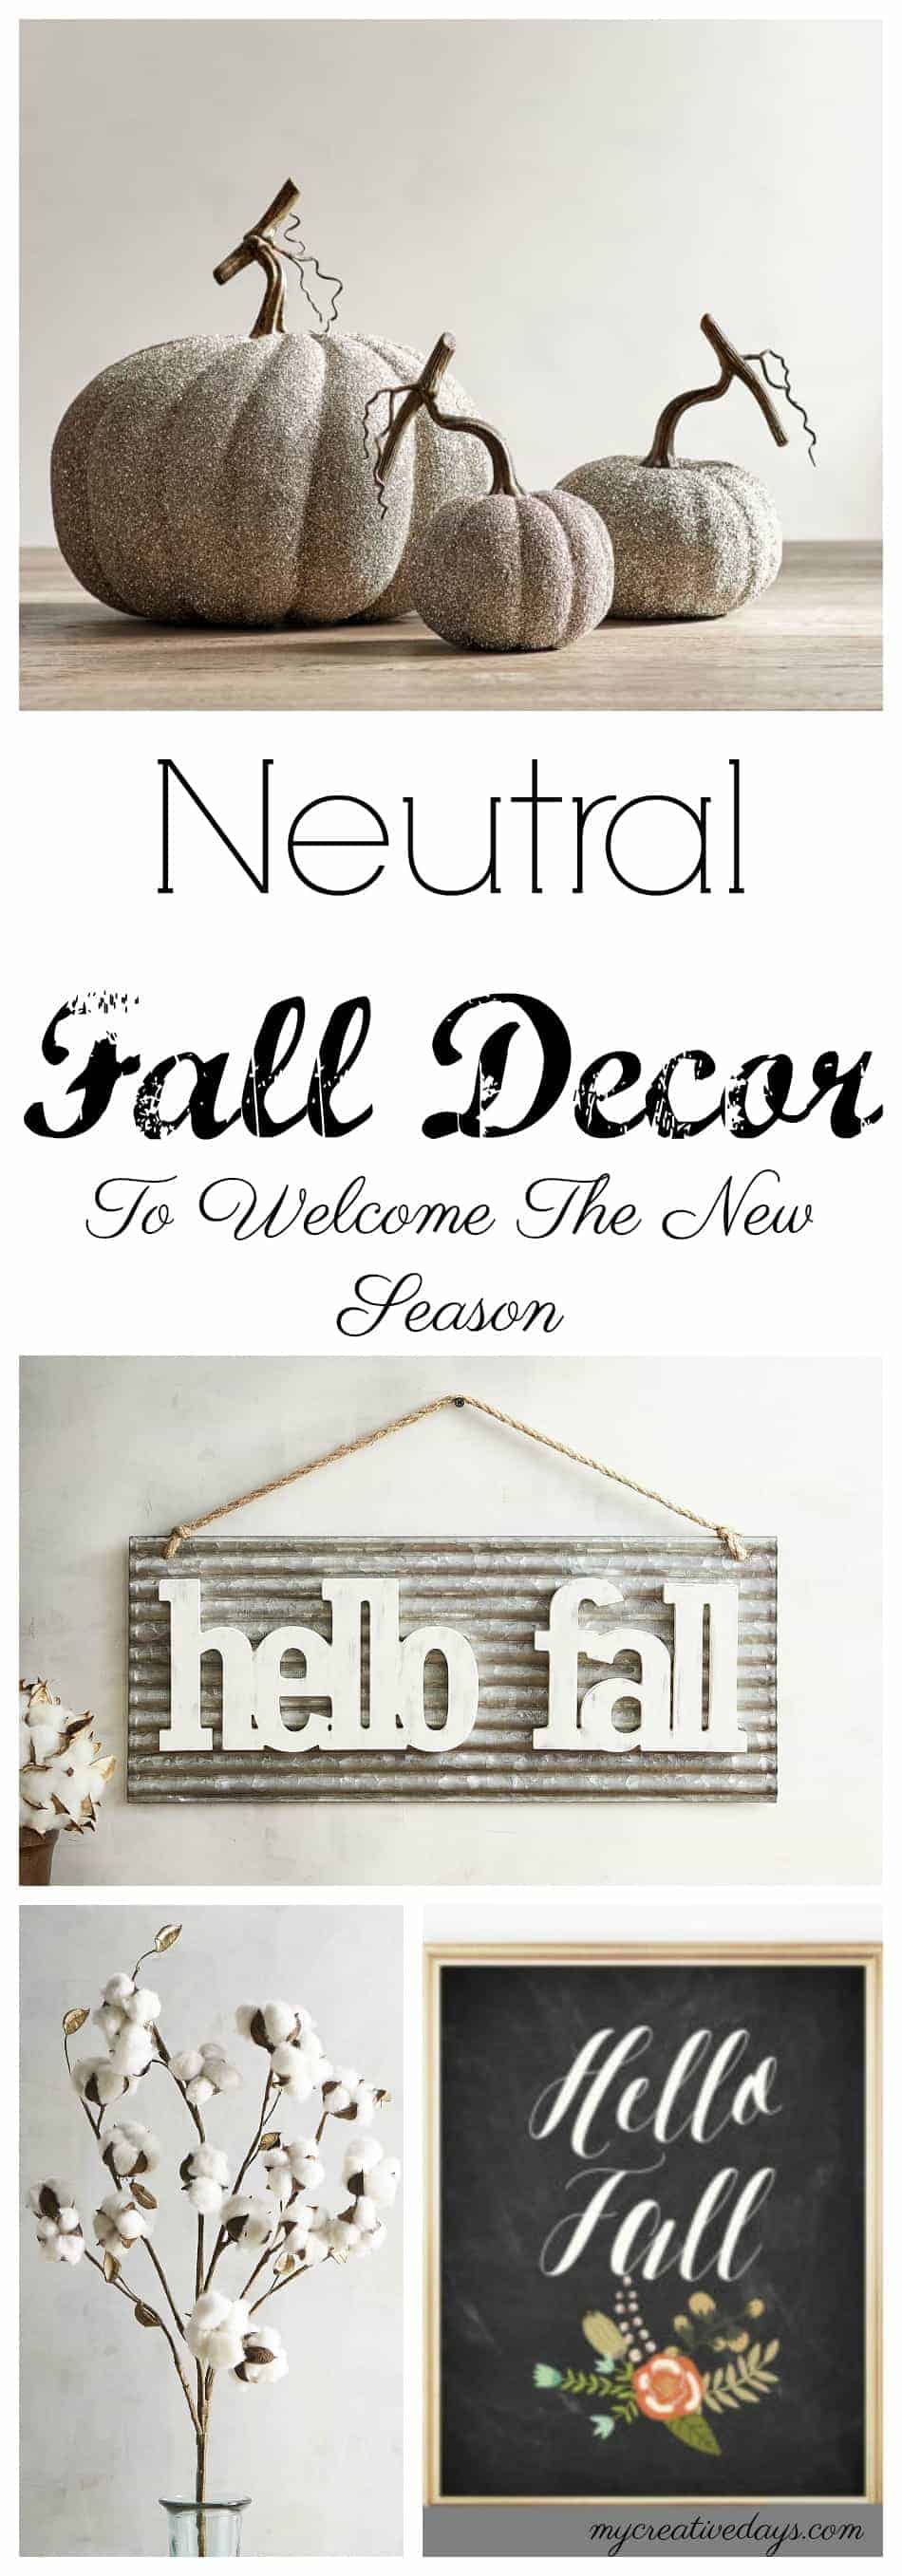 Neutral Fall Decor To Welcome The New Season - My Creative Days